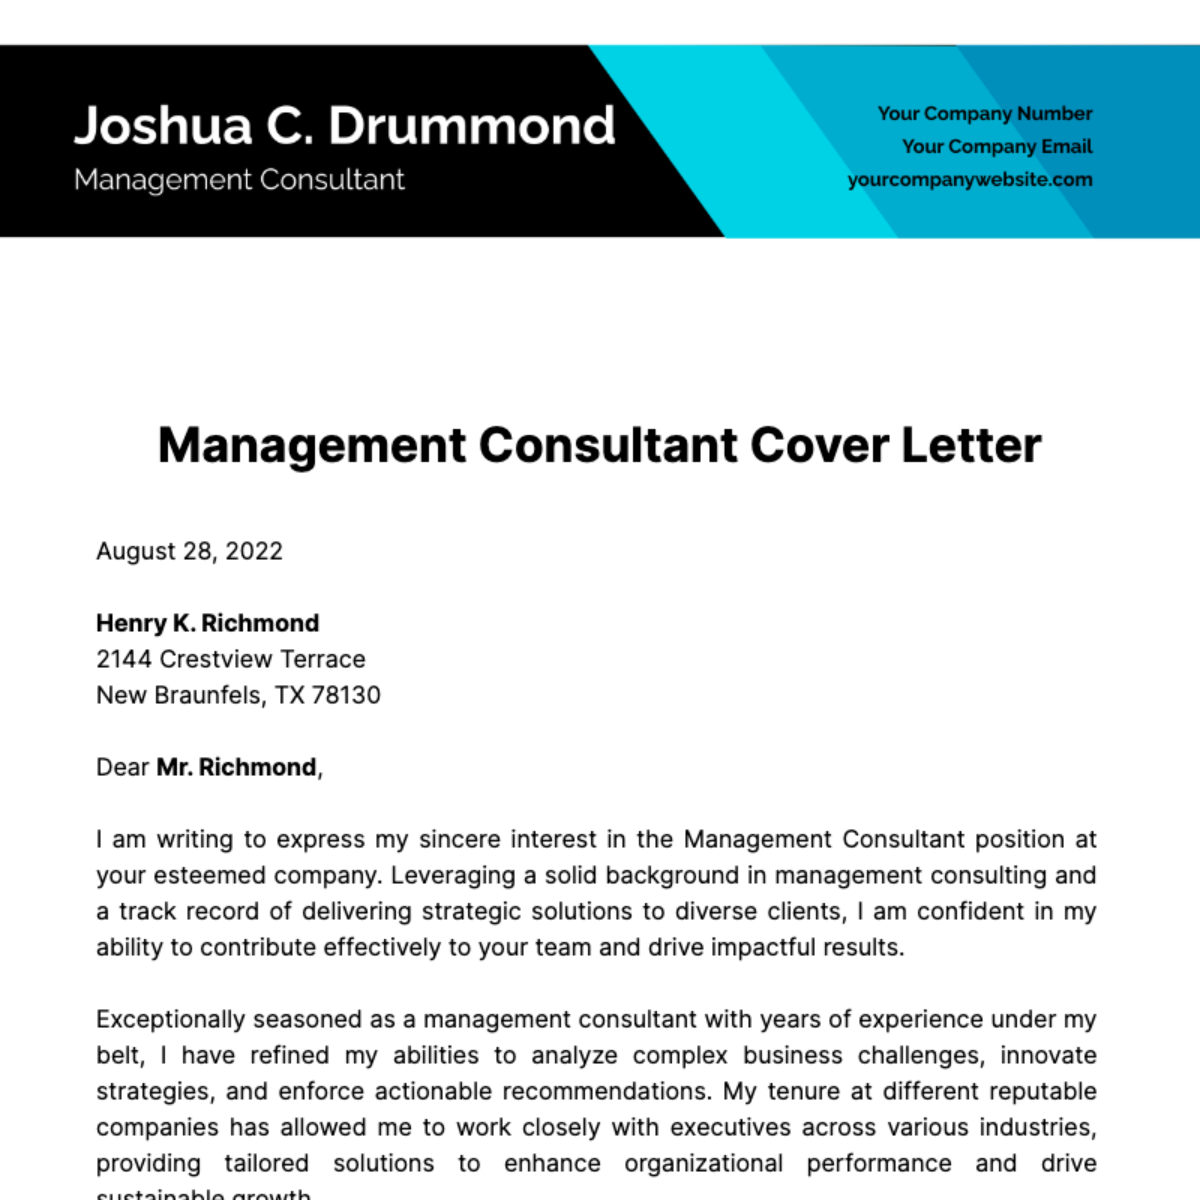 Management Consultant Cover Letter Template